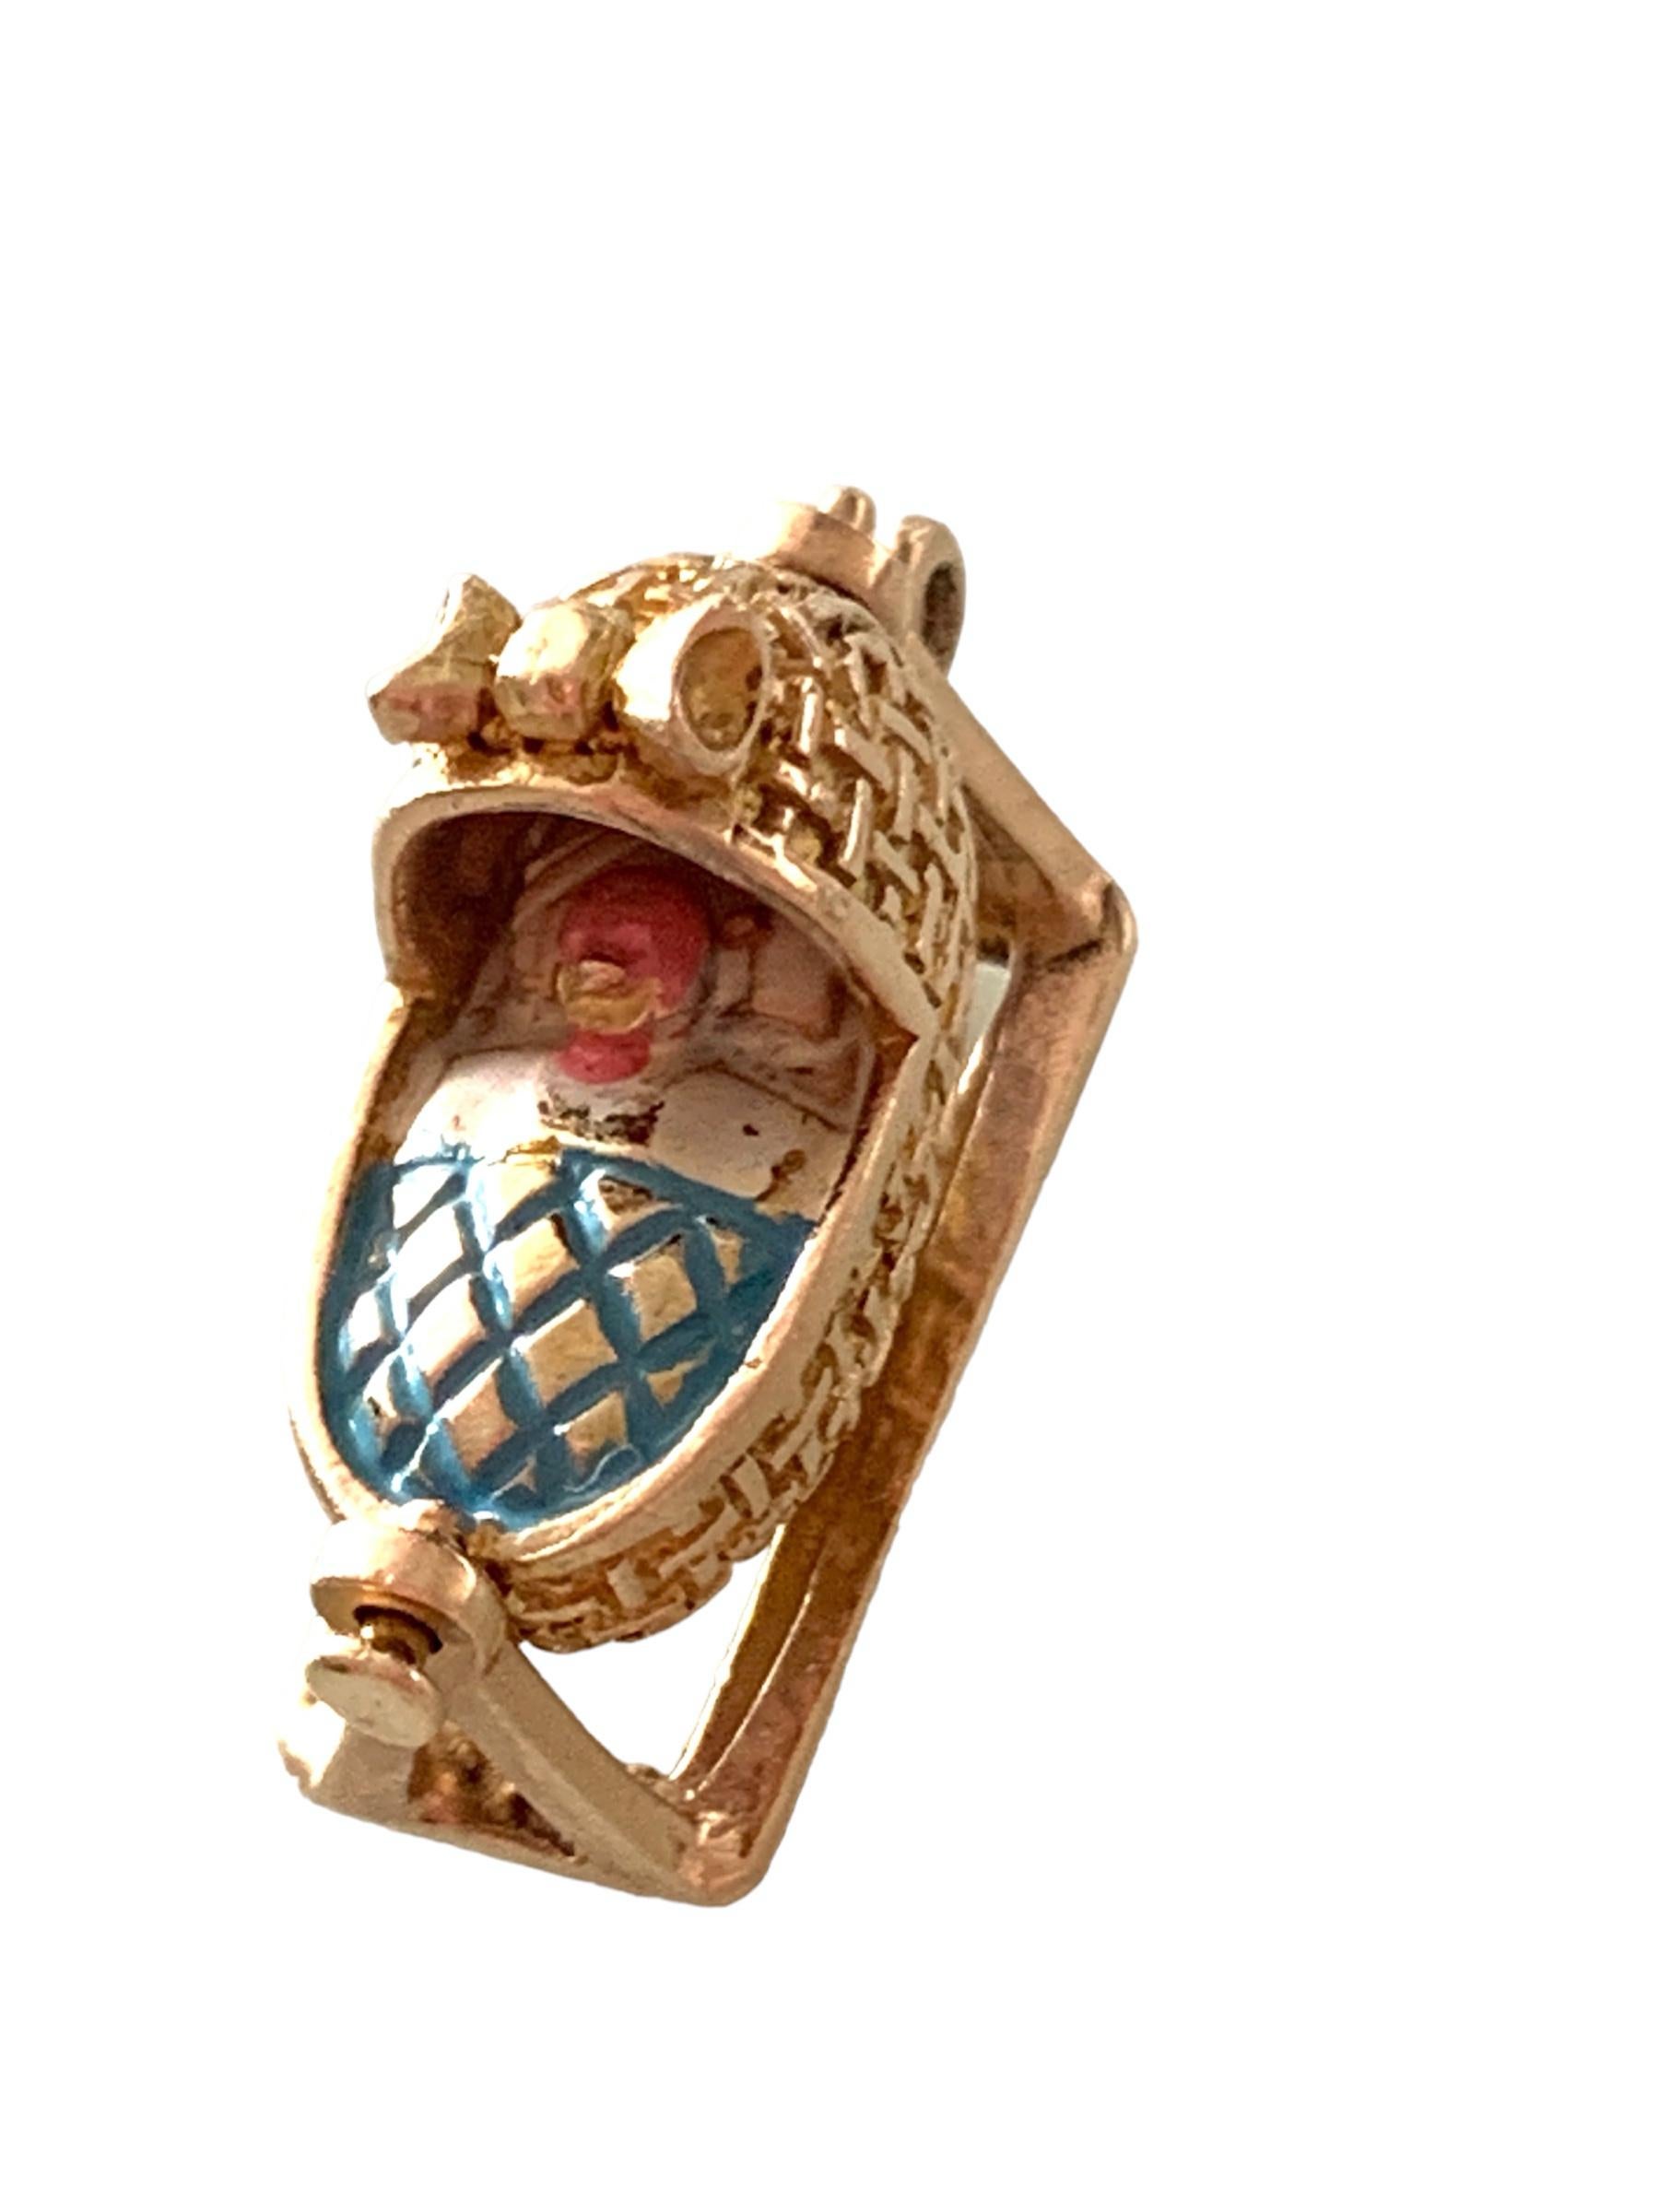 9ct gold Vintage Rocking babies cradle charm
the actual baby's bonnet, and blanket  are enameled which has slightly worn
Fully Hallmarked 
Payton & Pepper & Sons Ltd dated 
Stamped 9375 on one side of the cradle 
and the cradles stand is fully